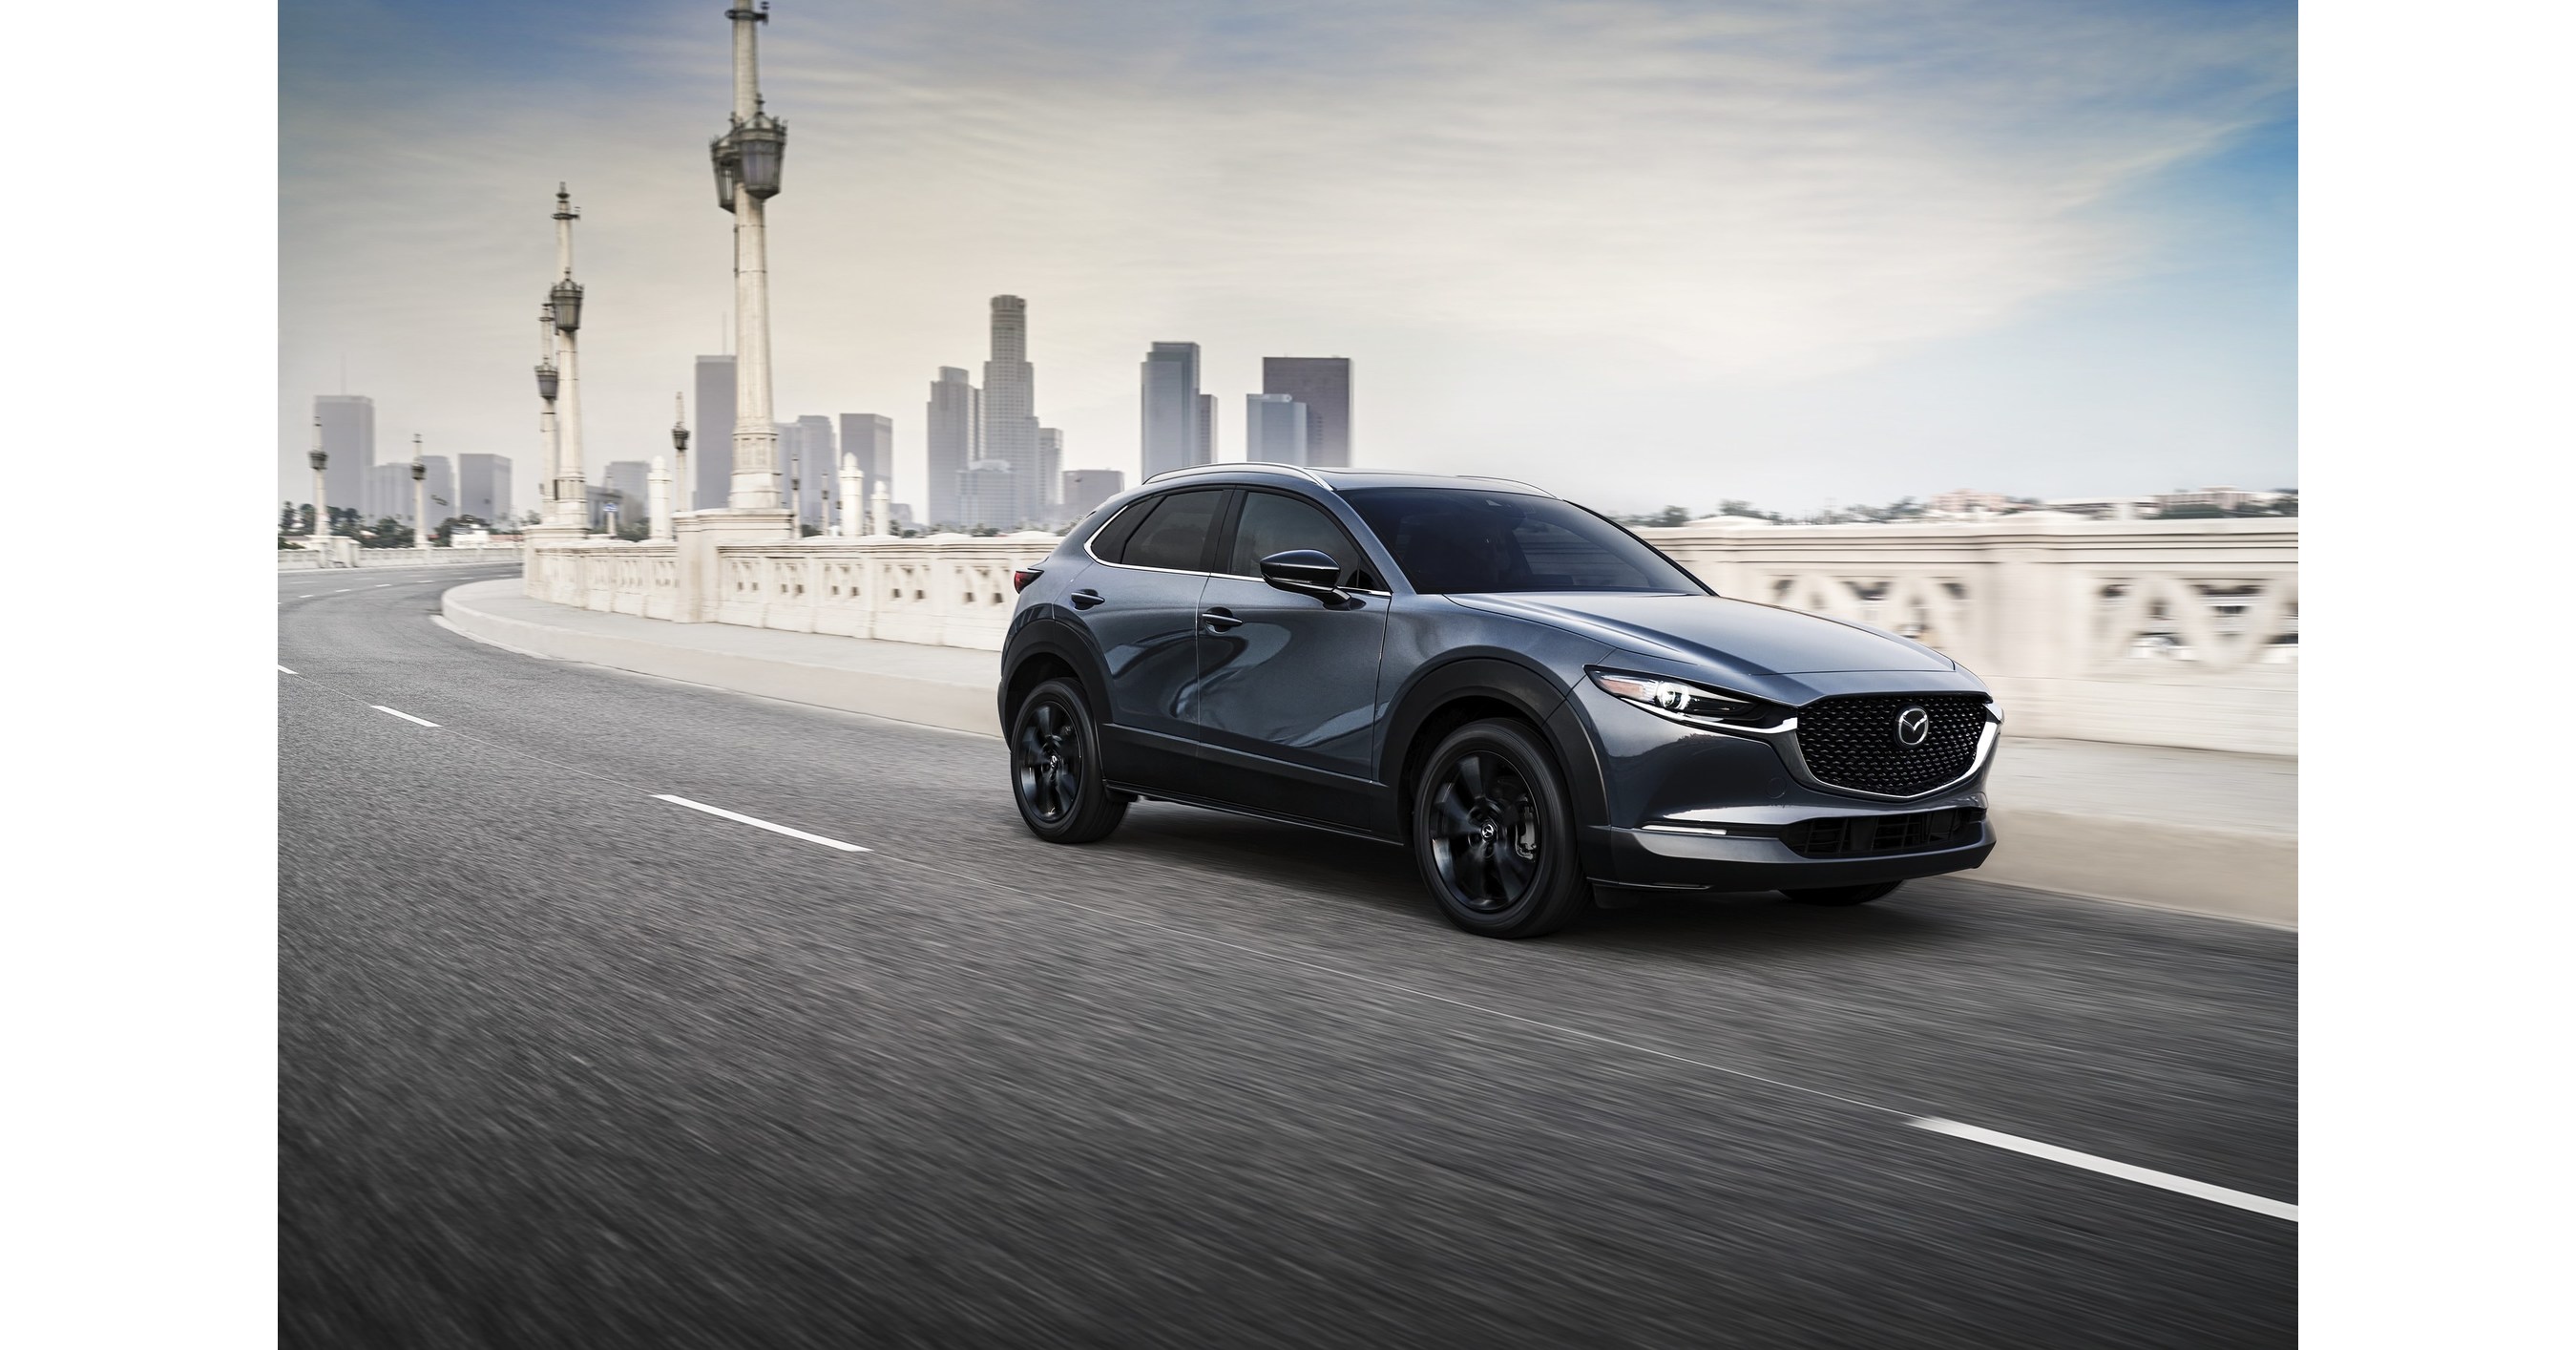 2020 Mazda CX-30: What's It Like to Live With?